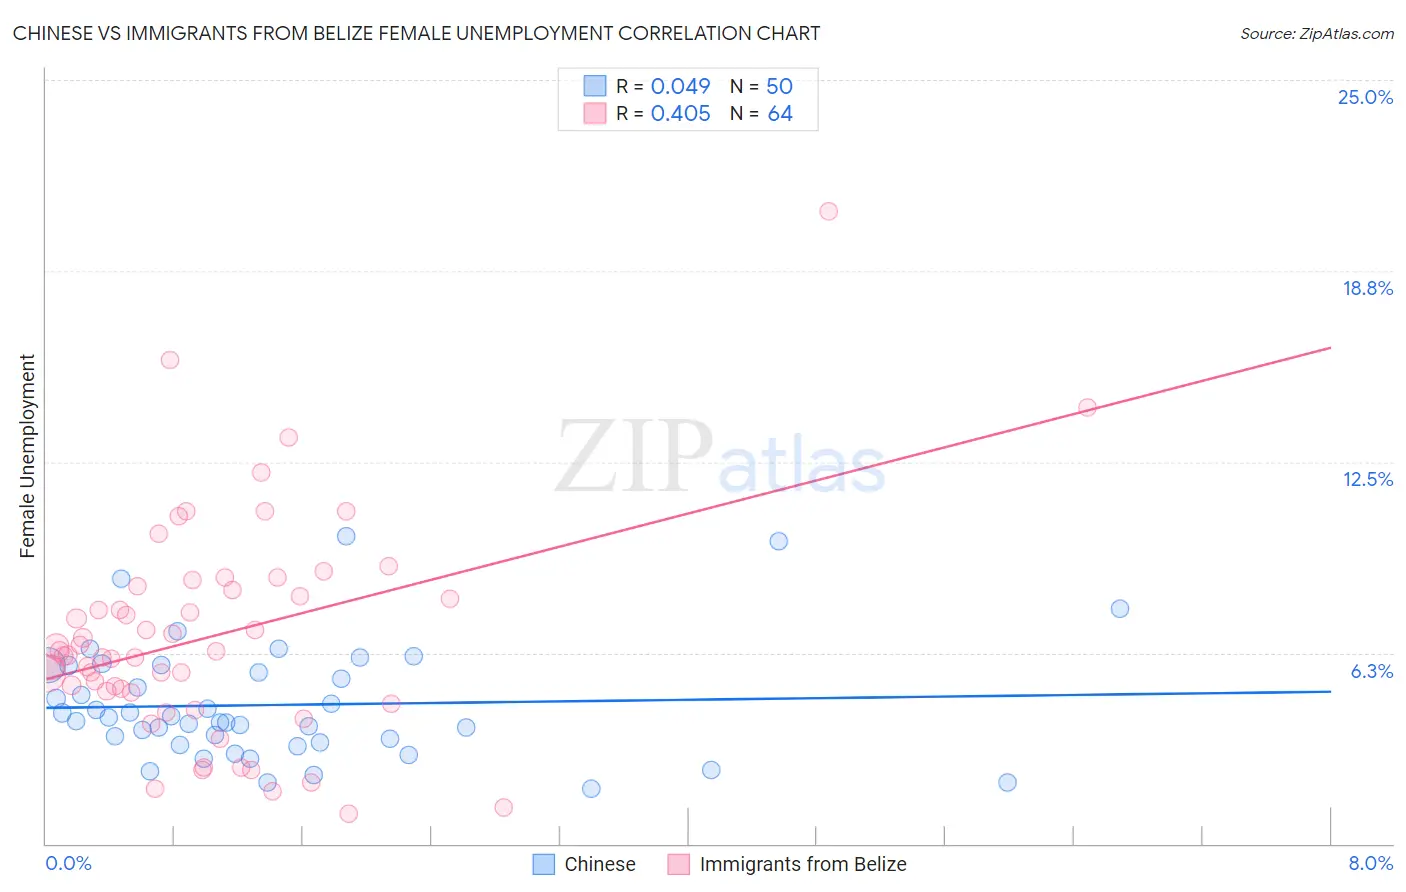 Chinese vs Immigrants from Belize Female Unemployment